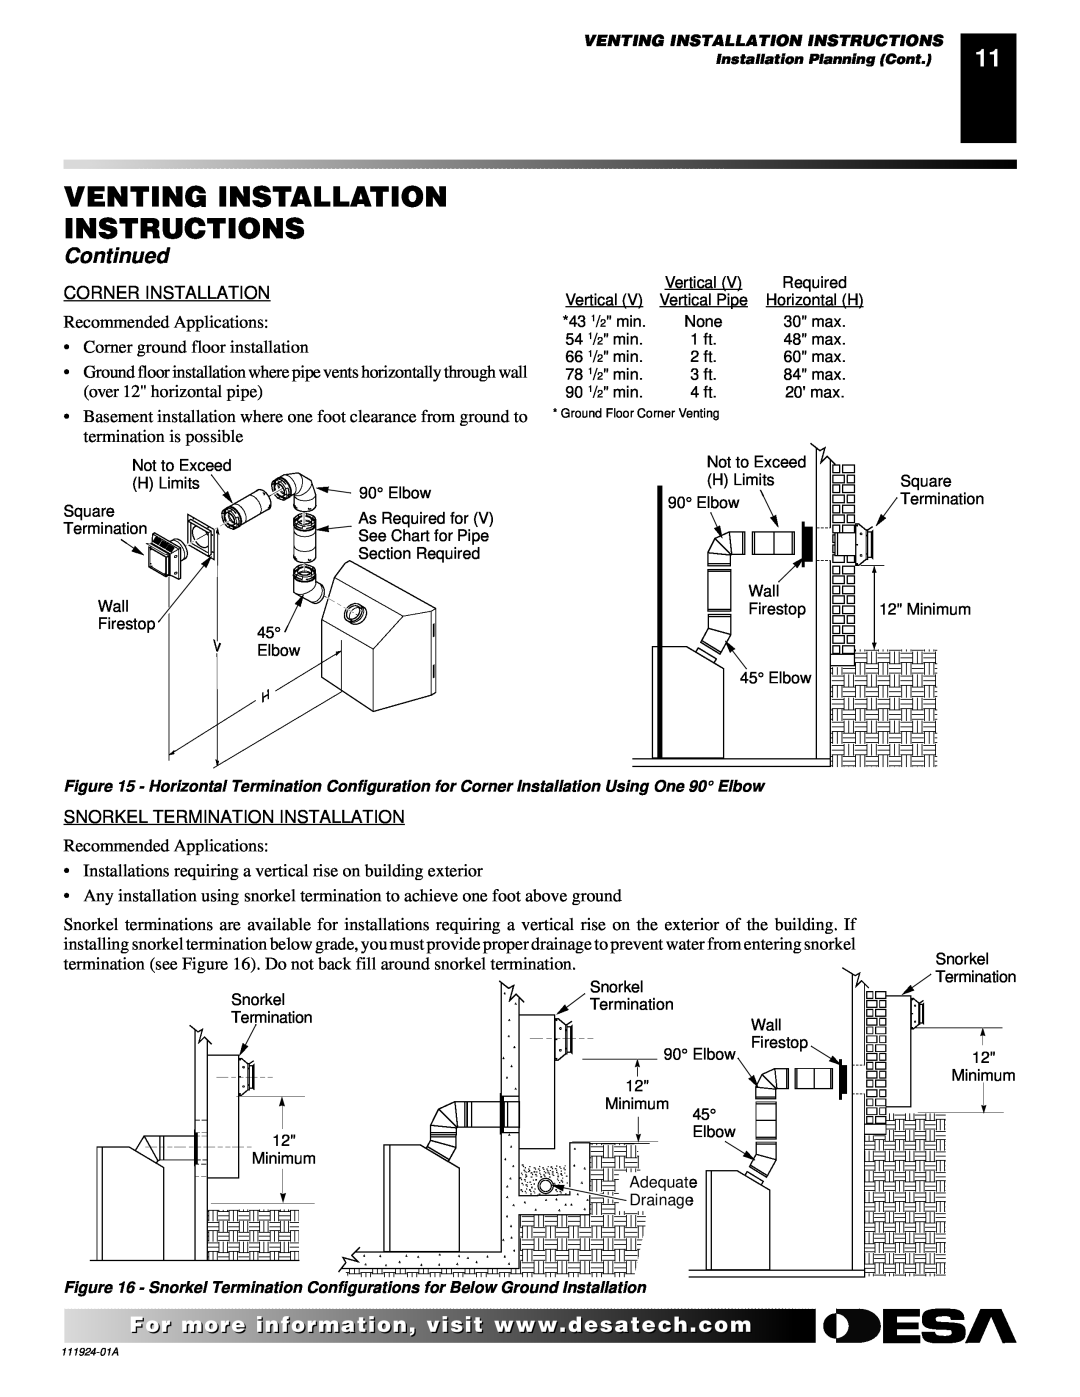 Desa K36EN, K36EP installation manual Venting Installation Instructions, Continued, Recommended Applications 